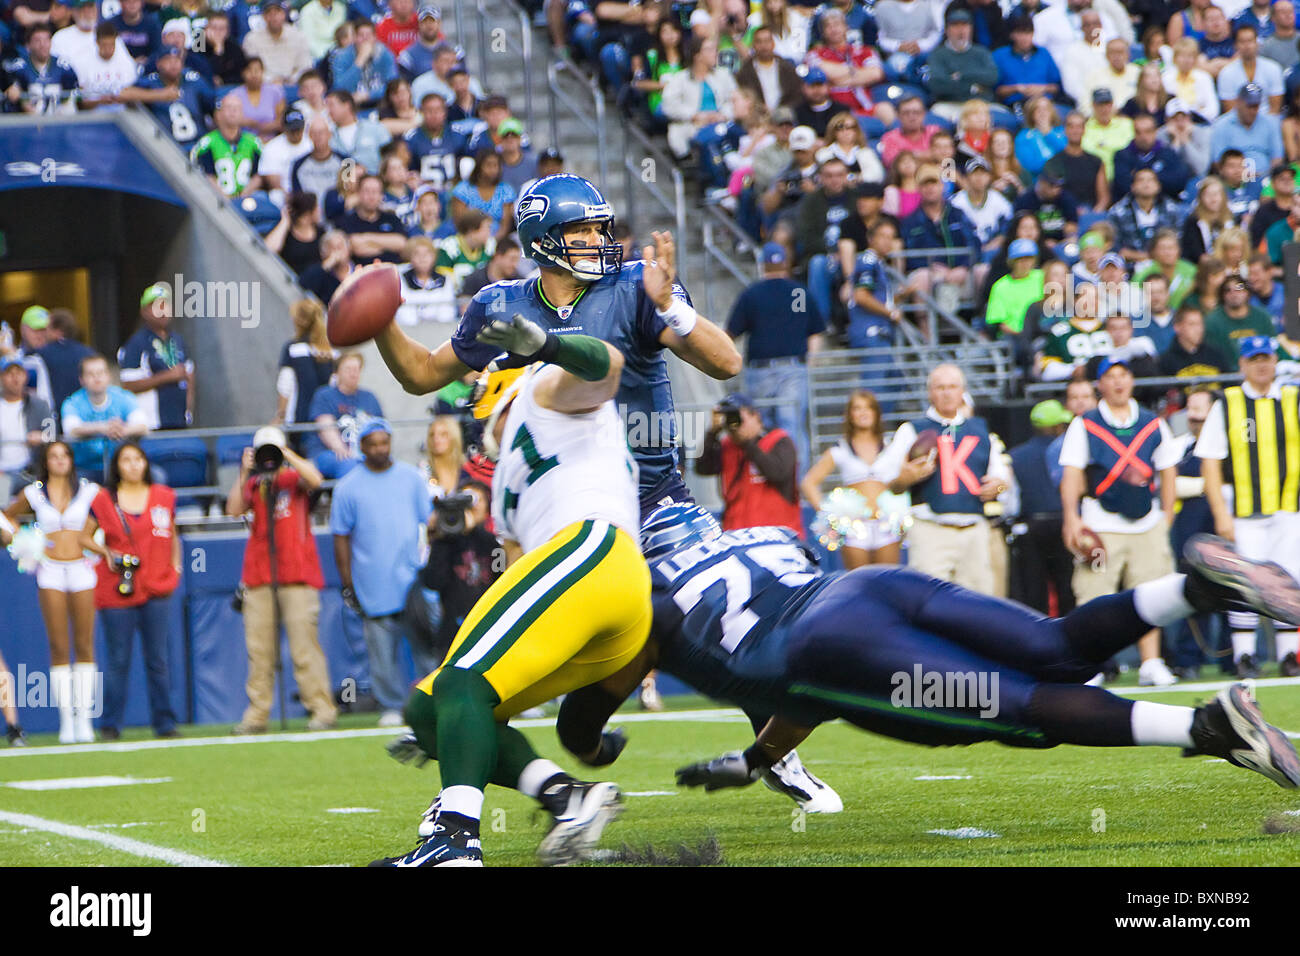 NFL football teams the Seattle Seahawks playing the Green Bay Packers Stock Photo